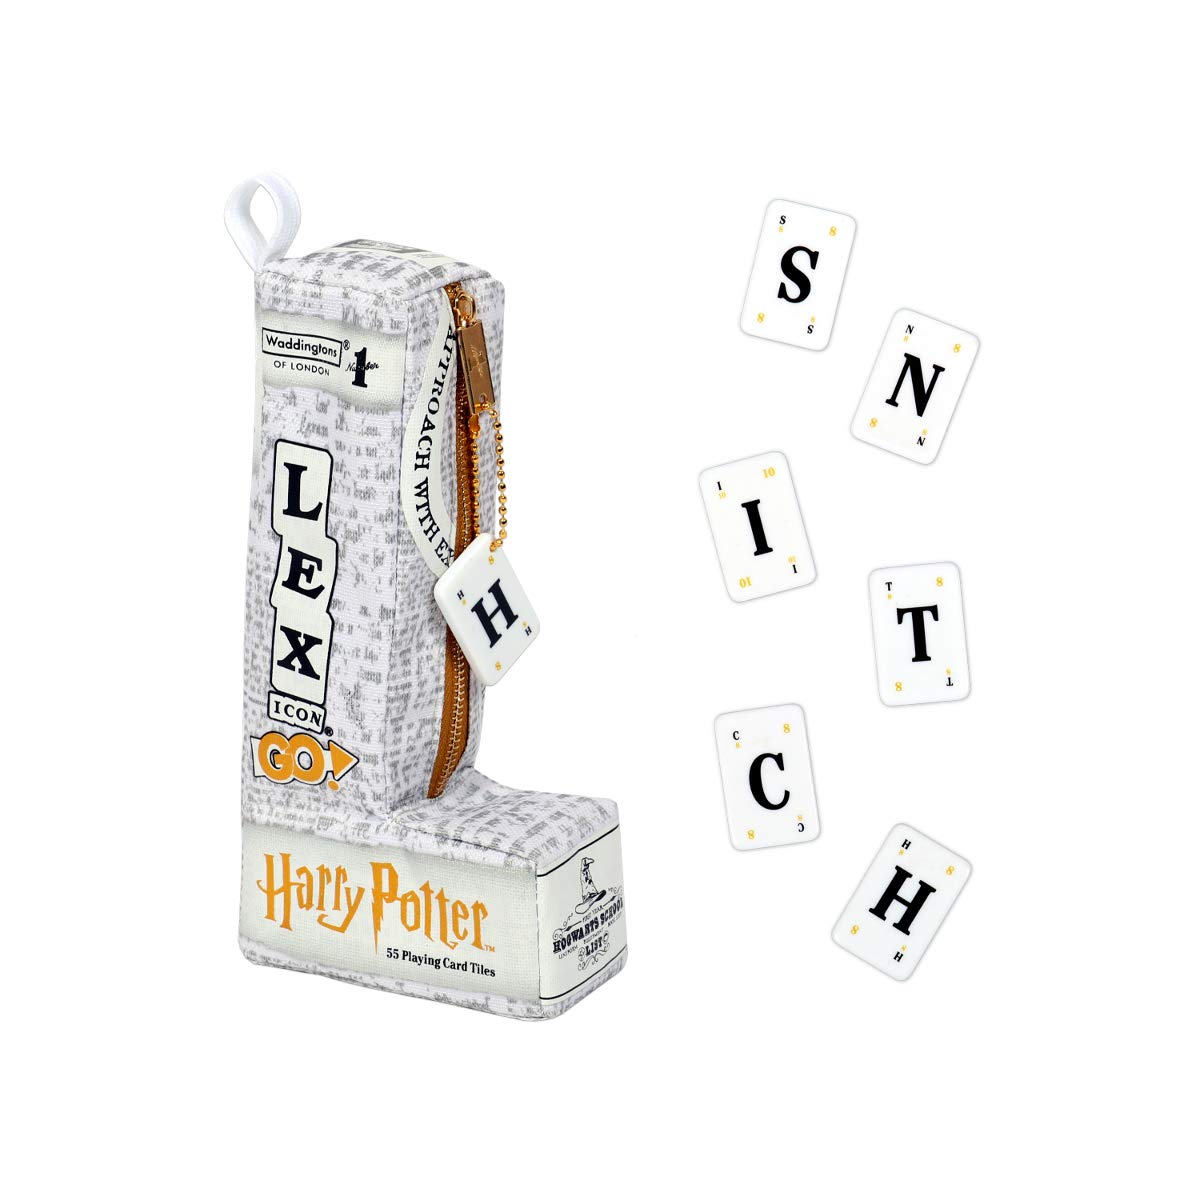 Harry Potter Lexicon-go! Word Game Board Puzzle